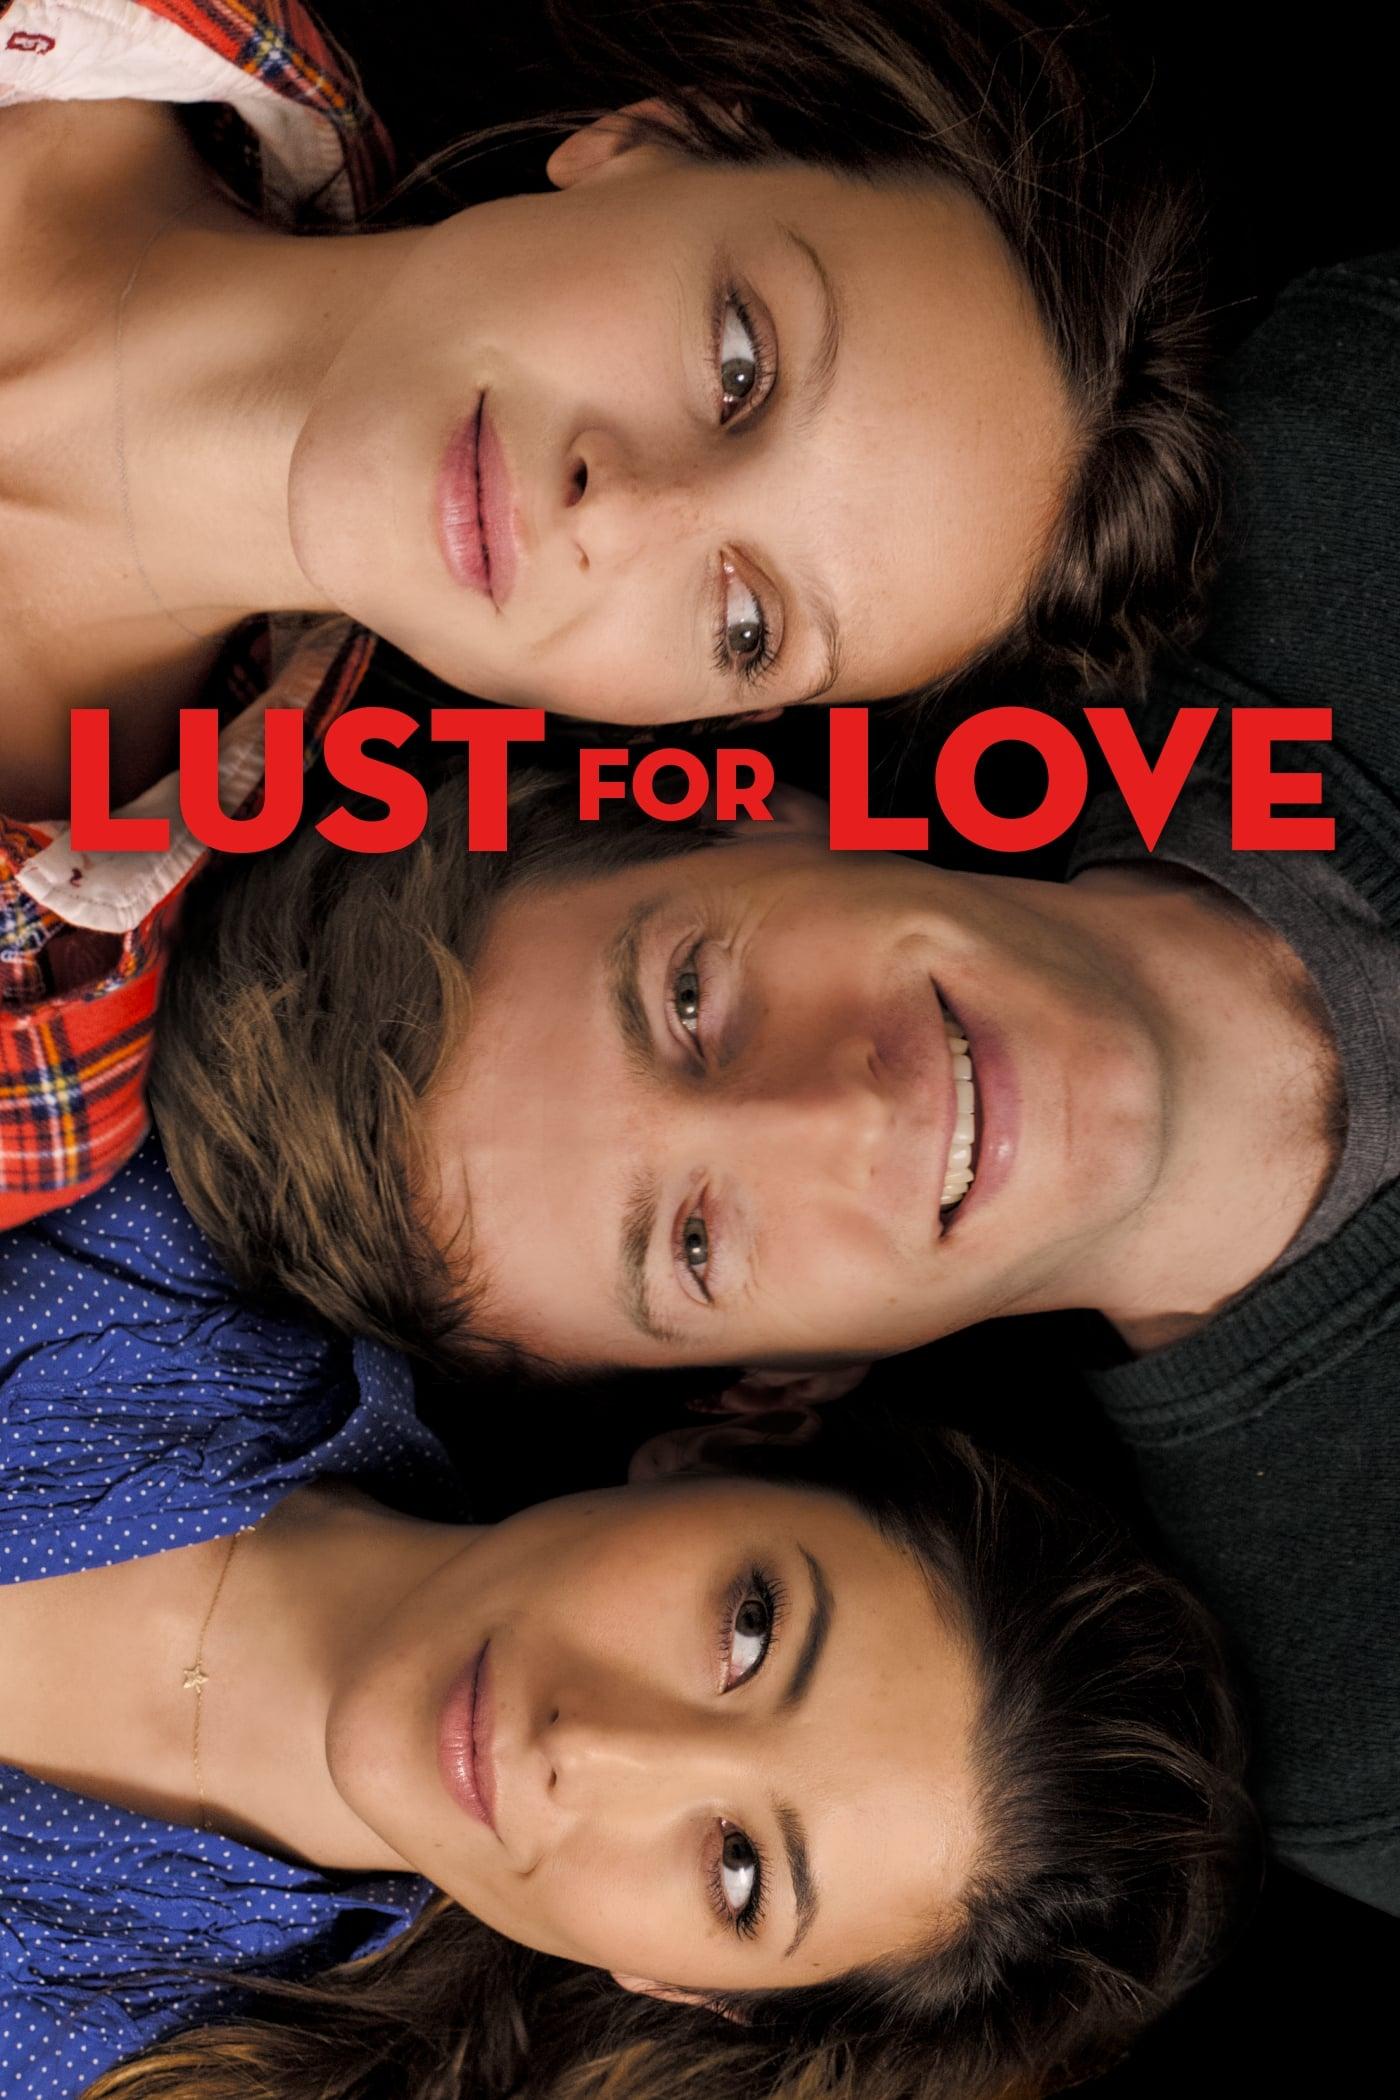 Lust for Love poster